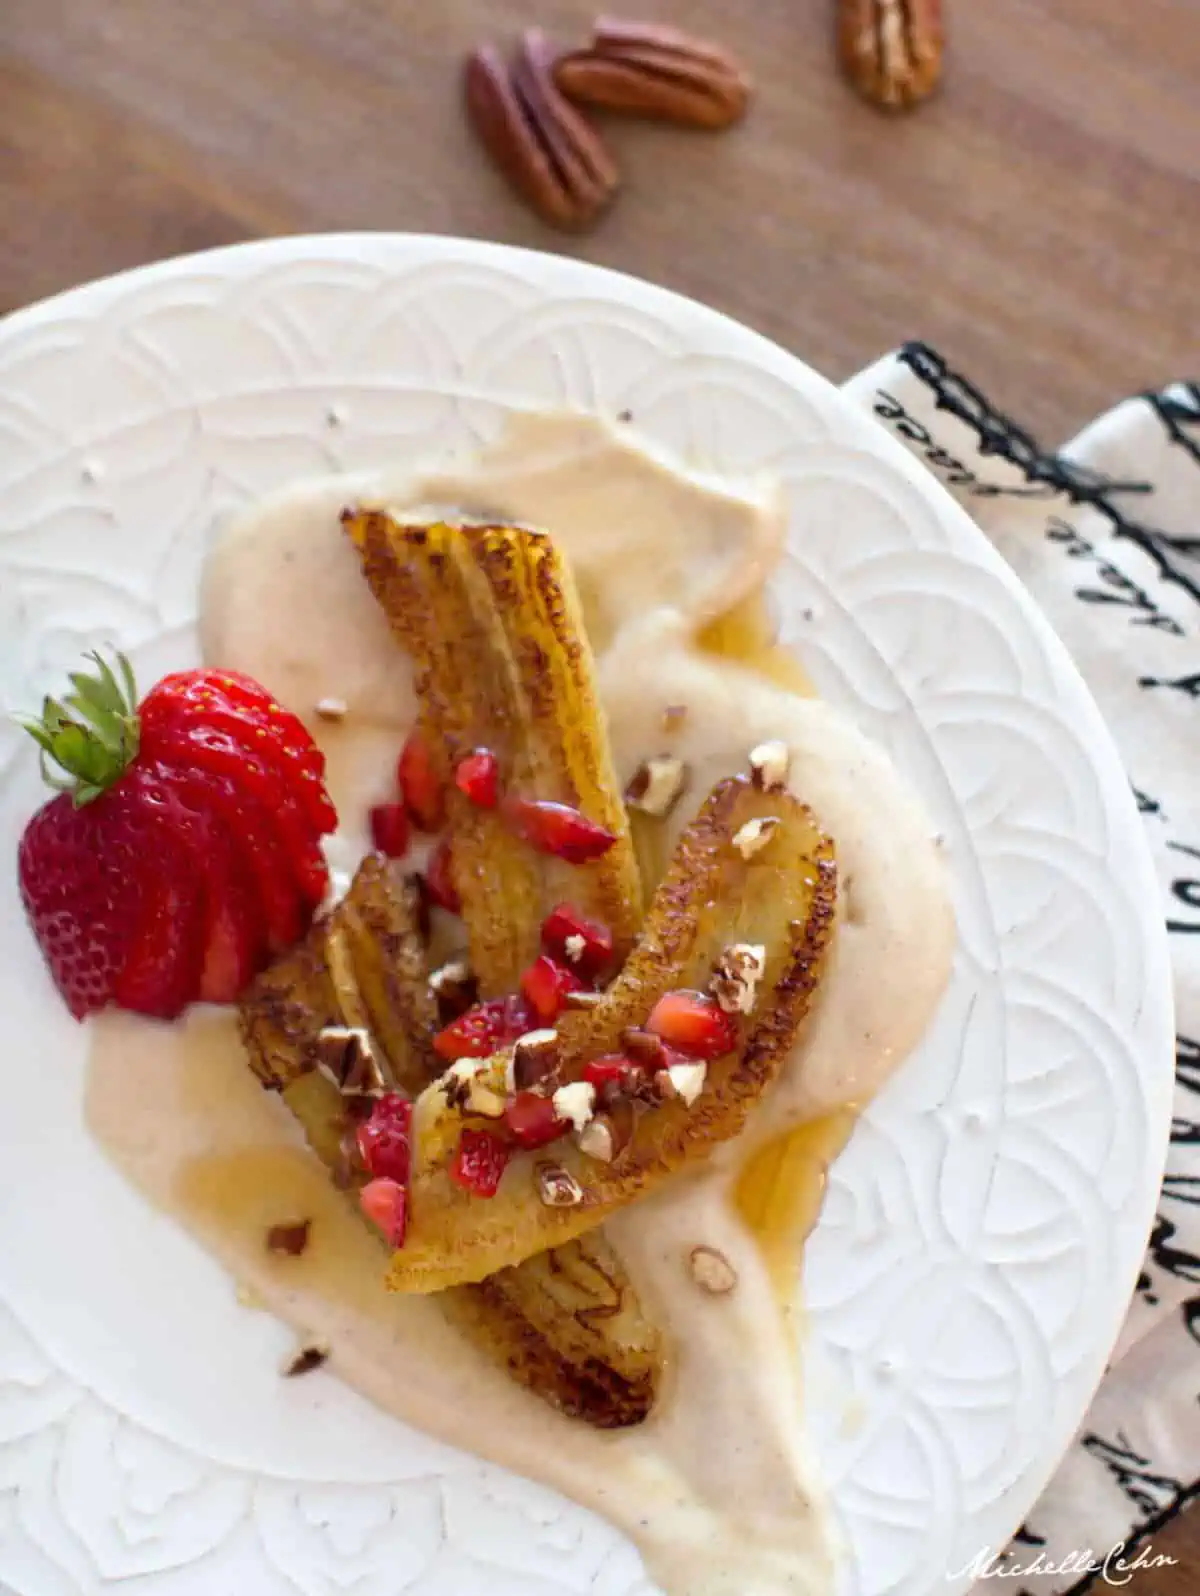 Pan fried cinnamon bananas on a plate with cream sauce and chopped strawberries and pecans.